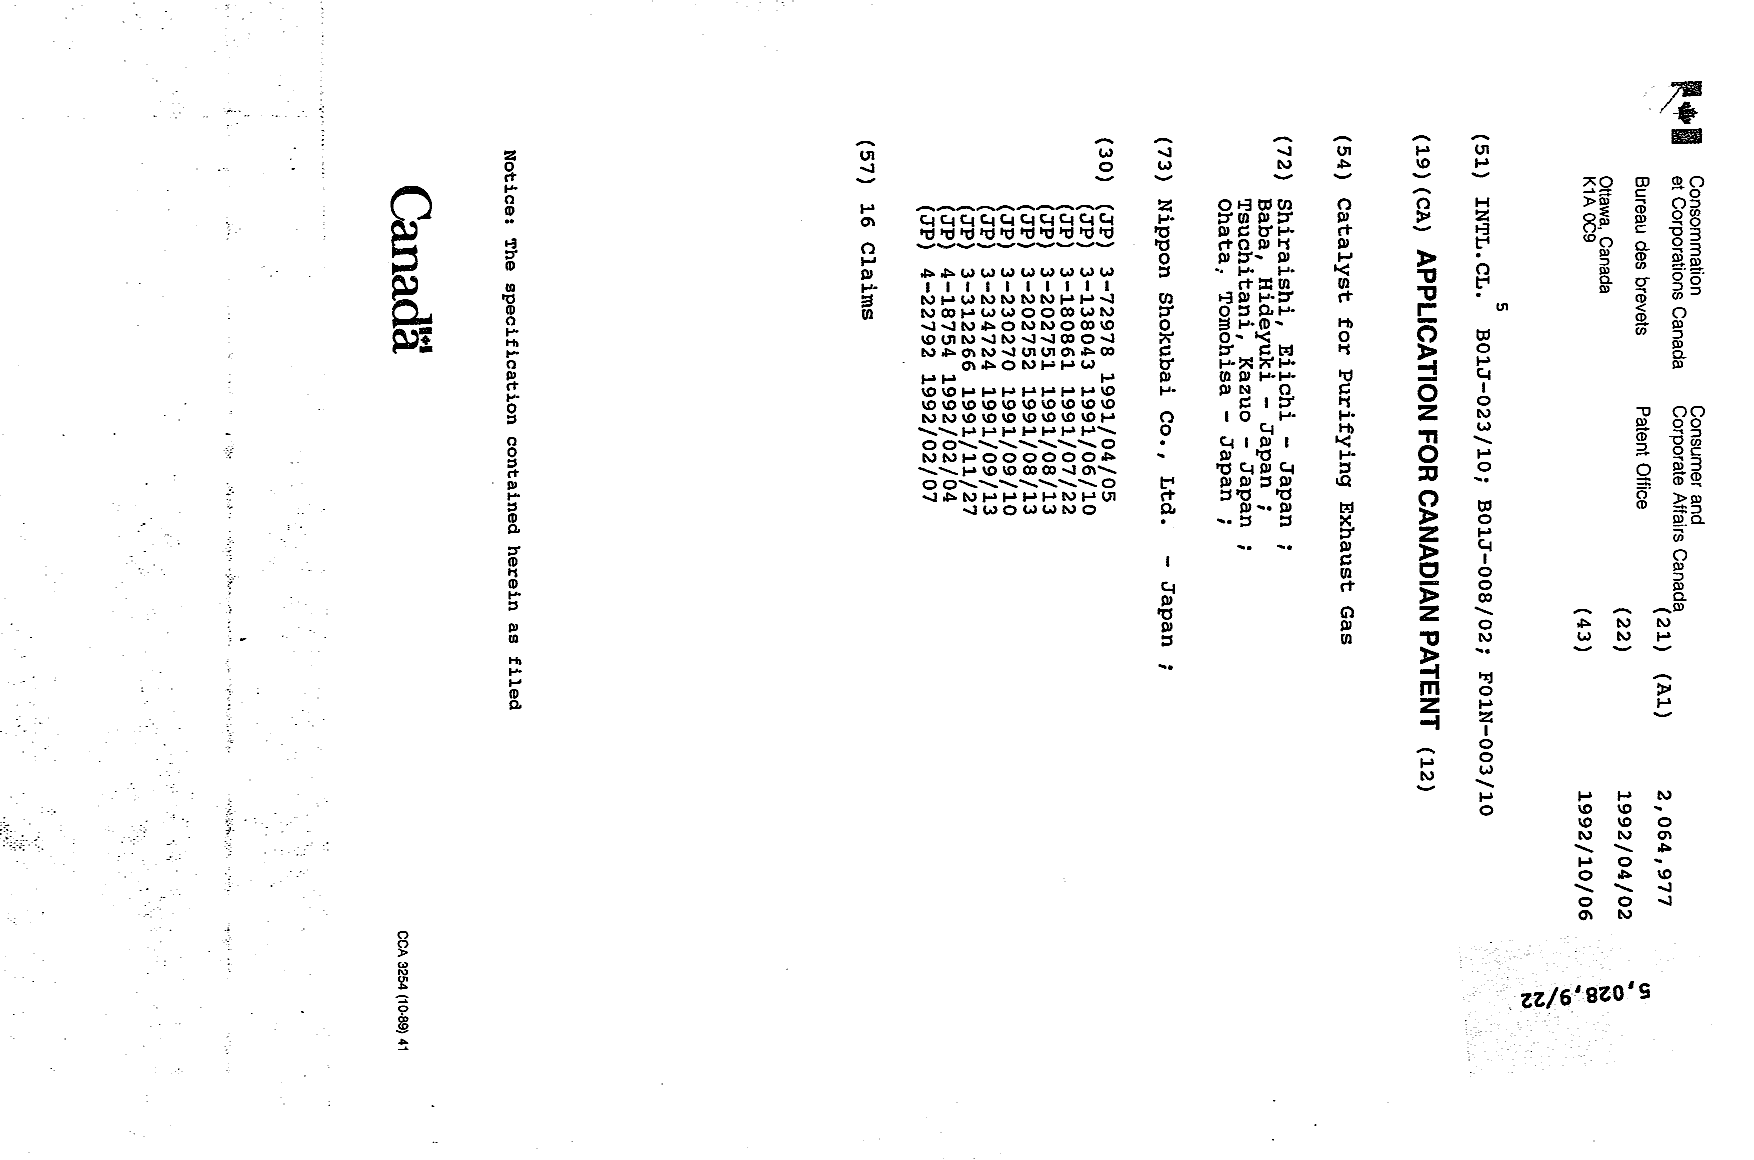 Canadian Patent Document 2064977. Cover Page 19931224. Image 1 of 1